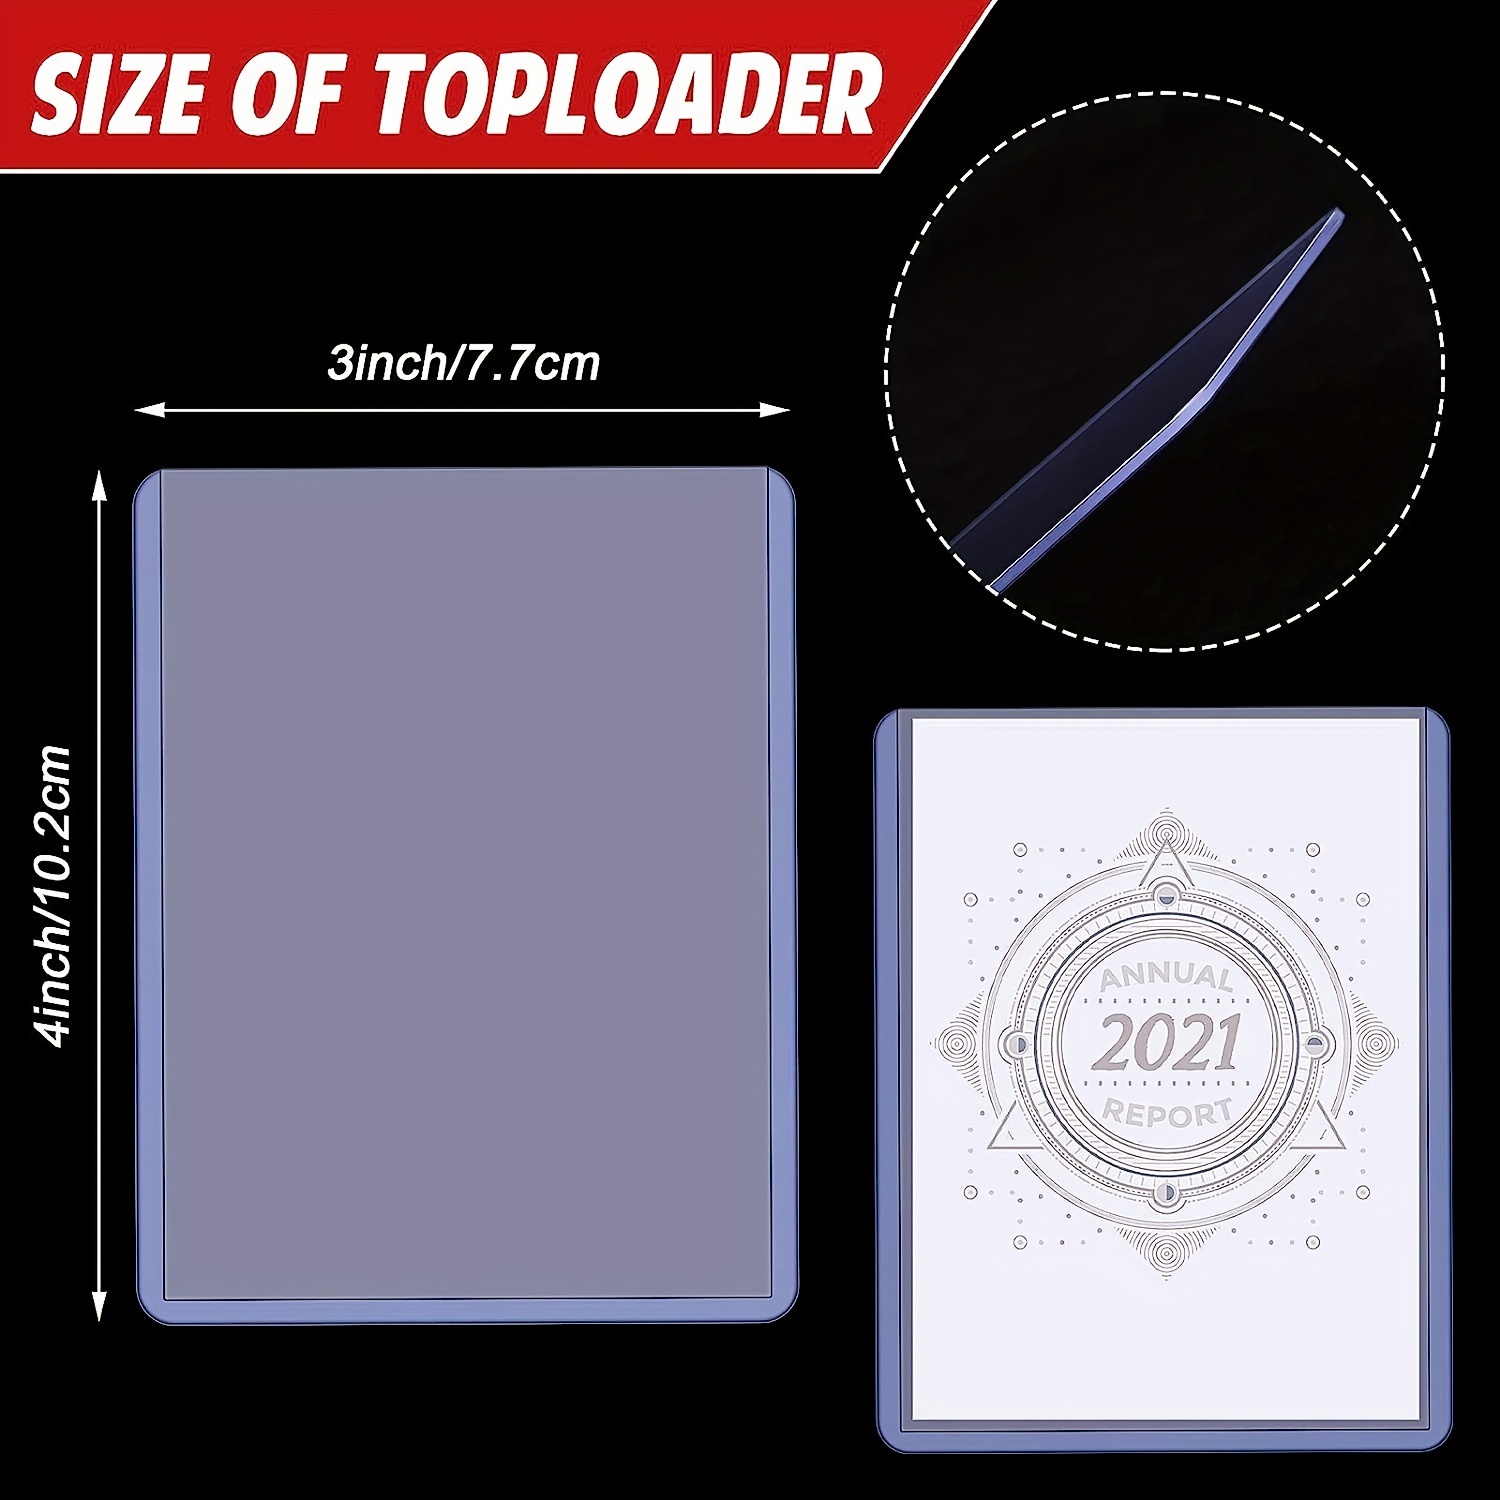 1 full case of 1000 Standard 3 x 4 Toploaders Collectible Supplies 35pt.  Top loaders